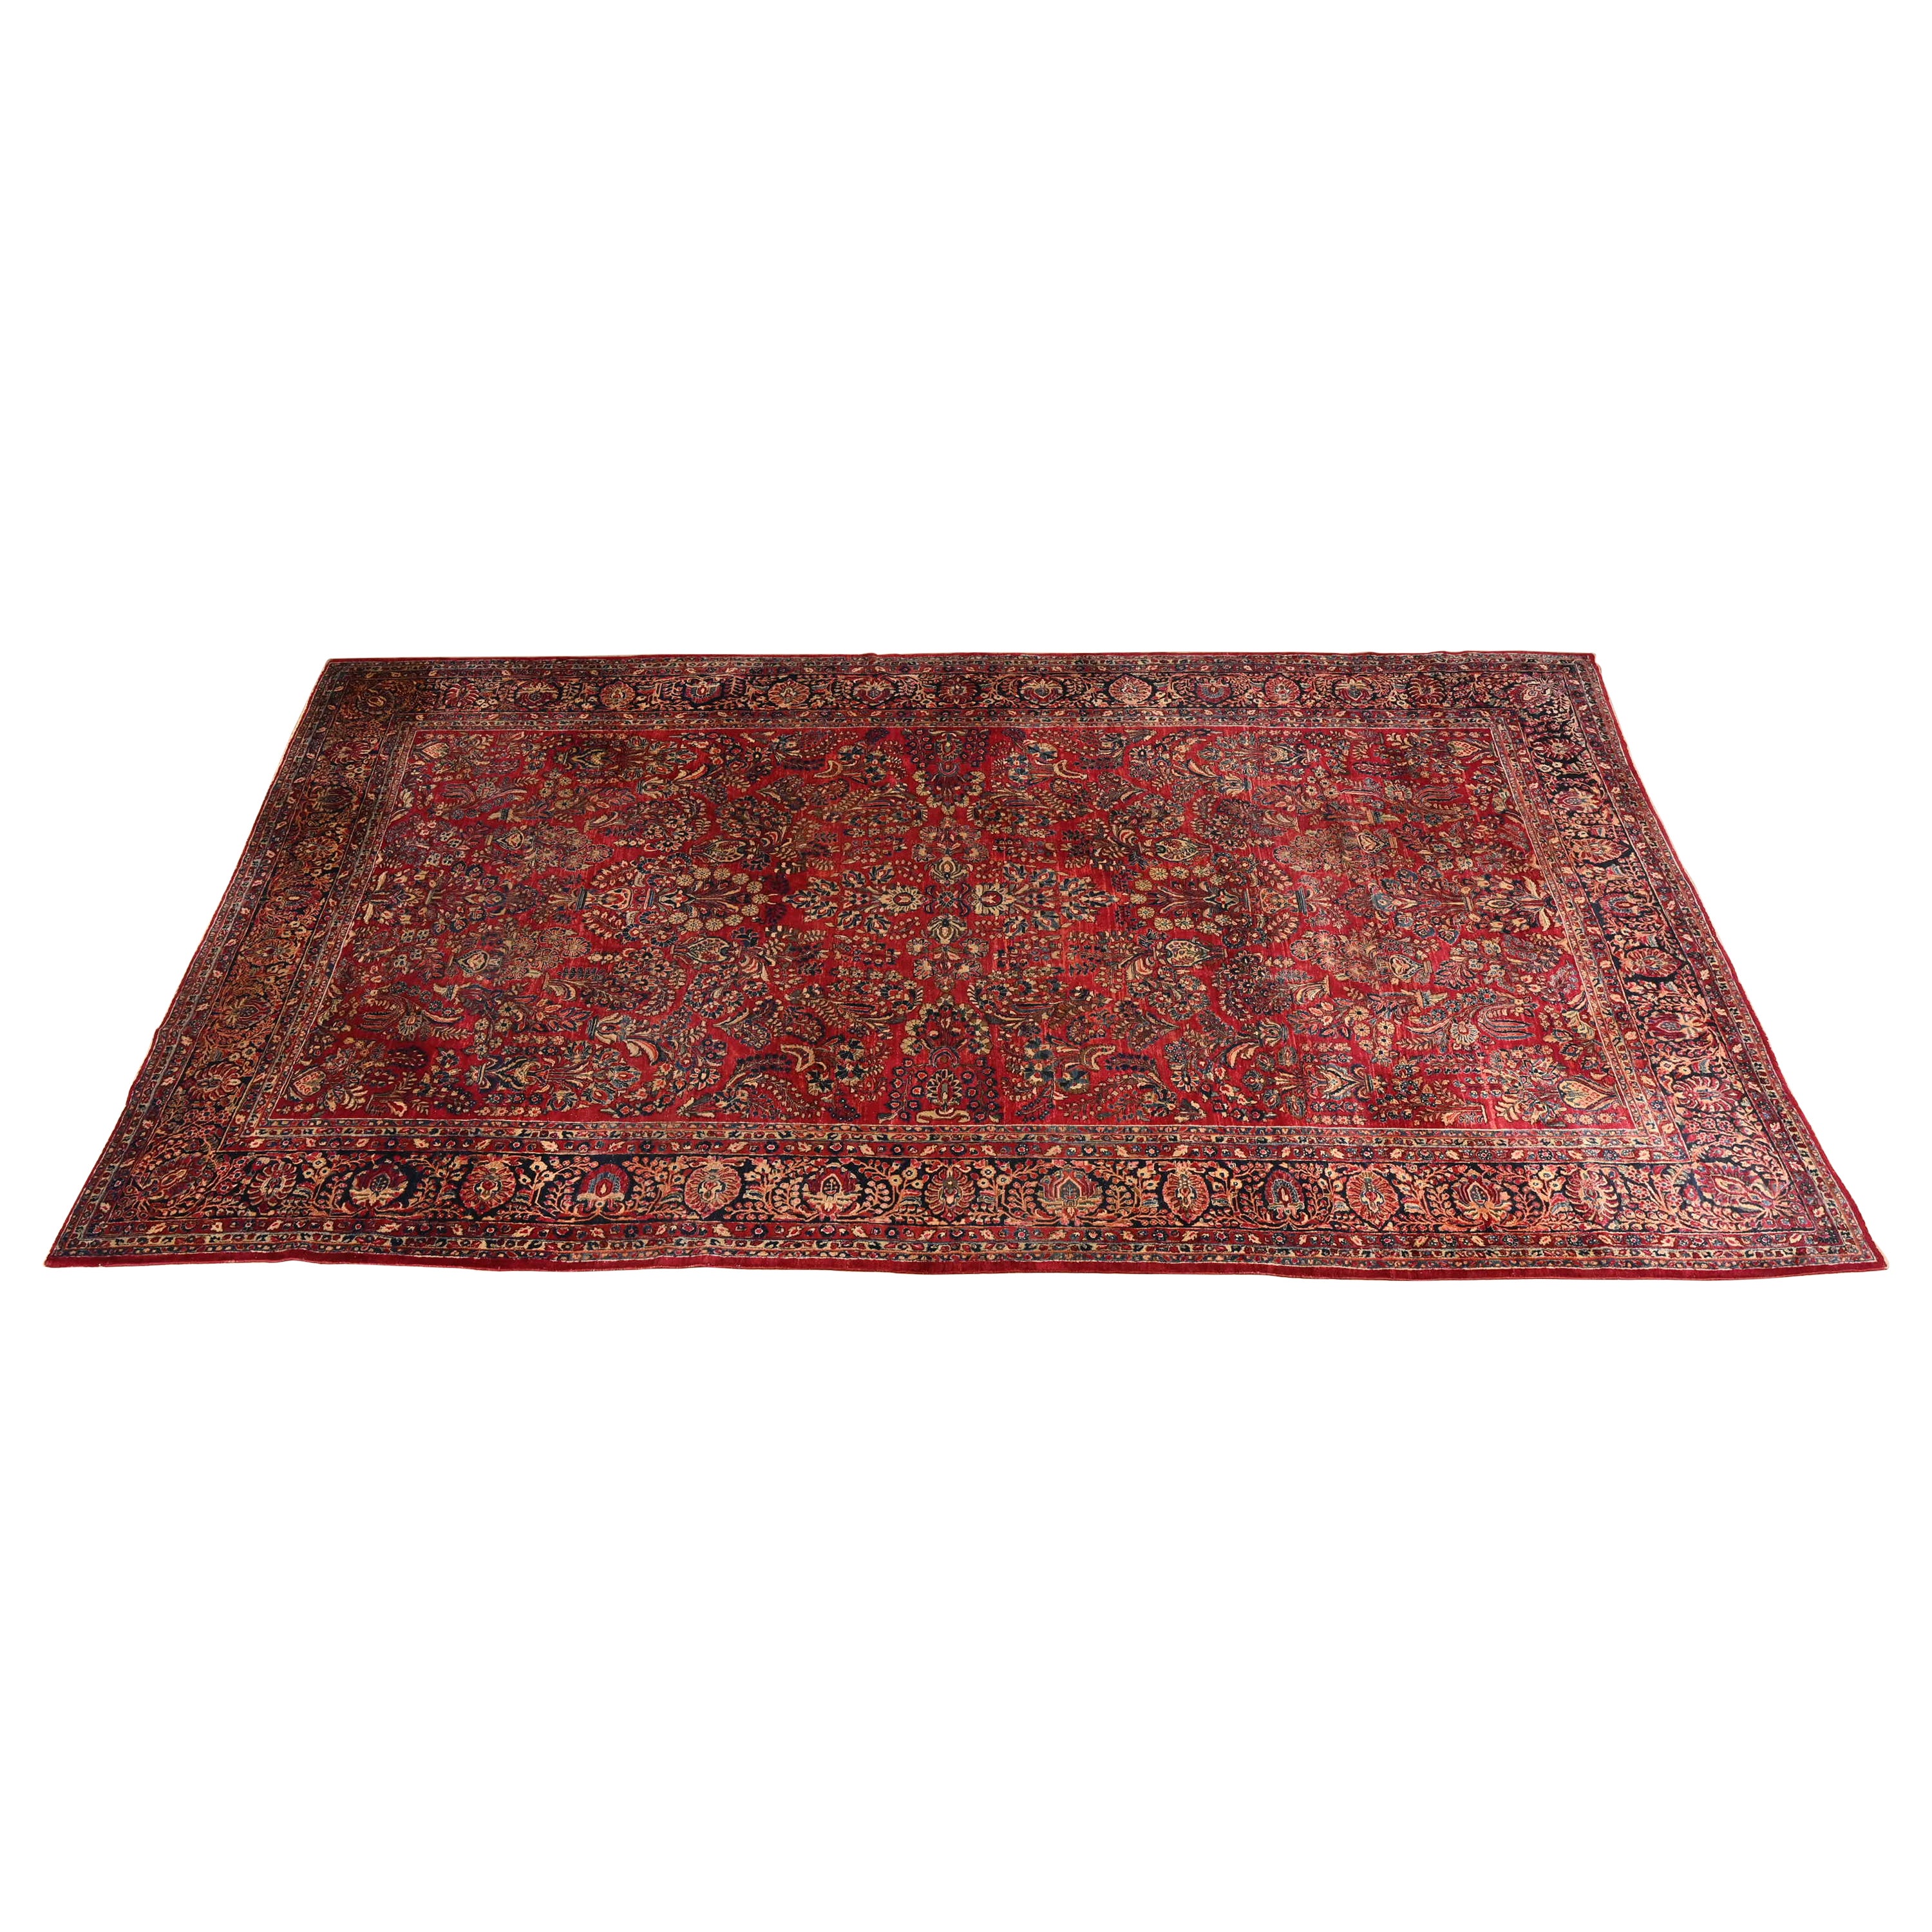 Antique Hand-Knotted Persian Sarouk Large Room Size Wool Rug, Circa 1930s For Sale